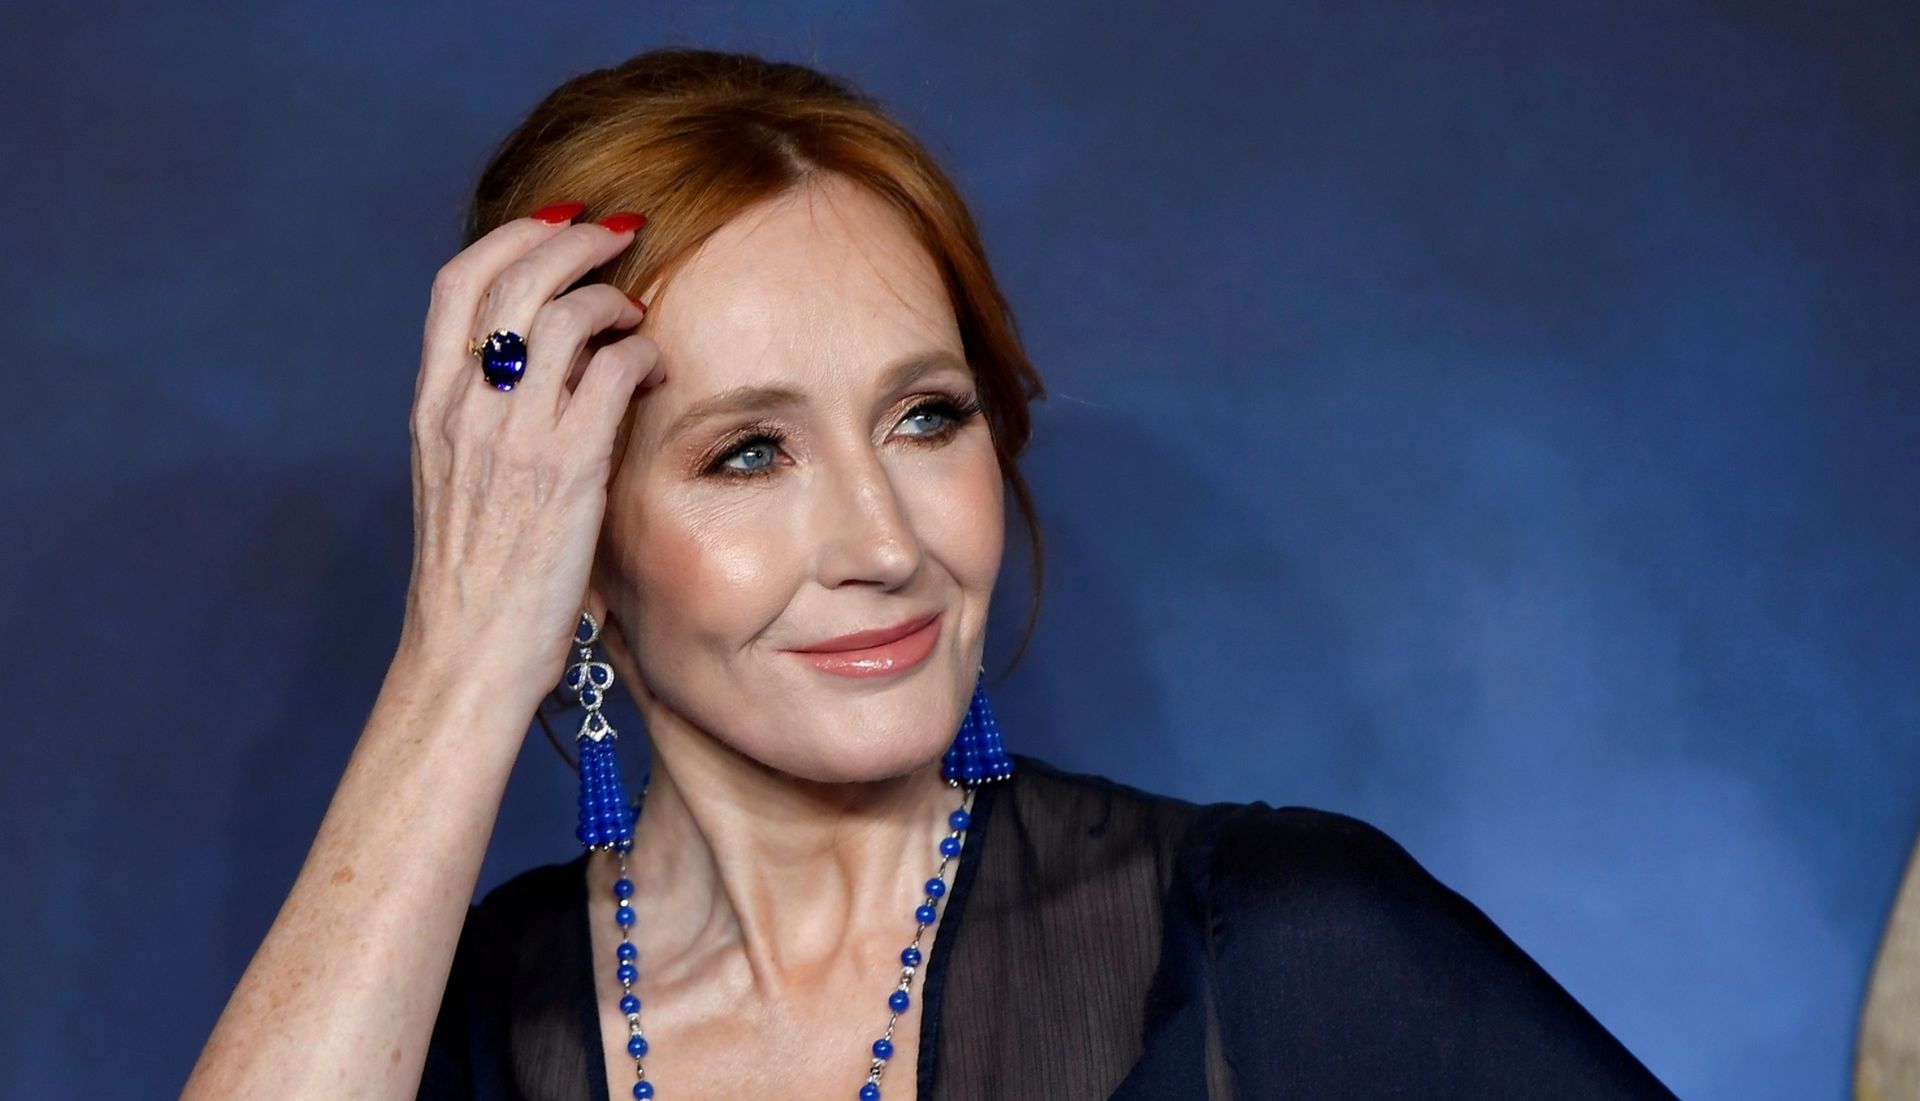 FILE PHOTO: 'Fantastic Beasts: The Crimes of Grindelwald' premiere in London FILE PHOTO: Writer J.K. Rowling attends the British premiere of 'Fantastic Beasts: The Crimes of Grindelwald' movie in London, Britain, November 13, 2018. REUTERS/Toby Melville/File Photo Toby Melville